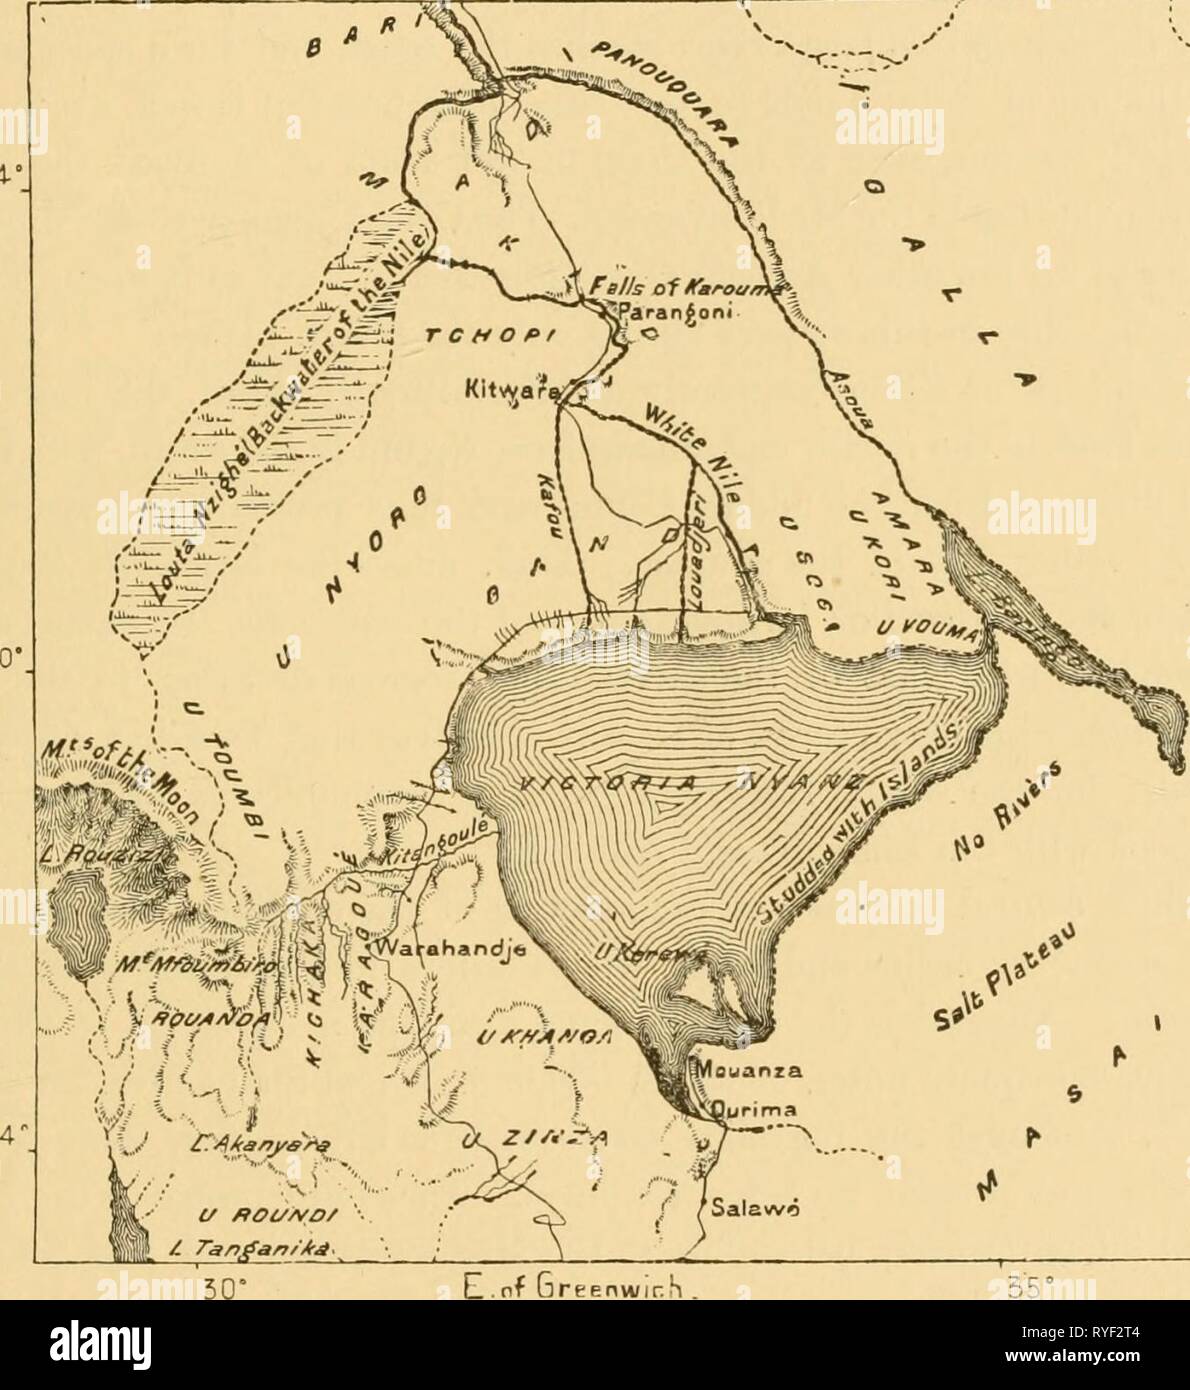 The earth and its inhabitants ..  earthitsinhabita0186recl Year: 1886  EIVEES. 7 sluo-o-isli rivers as the Juba, Tana, Lufiji, and Rovuma. But soutli of the great central lacustrine plateaux the Zambezi, whose furthest headstreams rise near the west coast, drains a vast tract of country estimated at about 750,000 square miles, or nearly three times the size of France. In volume it ranks third amongst African rivers, but in length fourth only. Still farther south the Limpopo has also a con- siderable discharge ; whereas the Orange, whose basin exceeds 400,000 square miles in extent, contributes Stock Photo